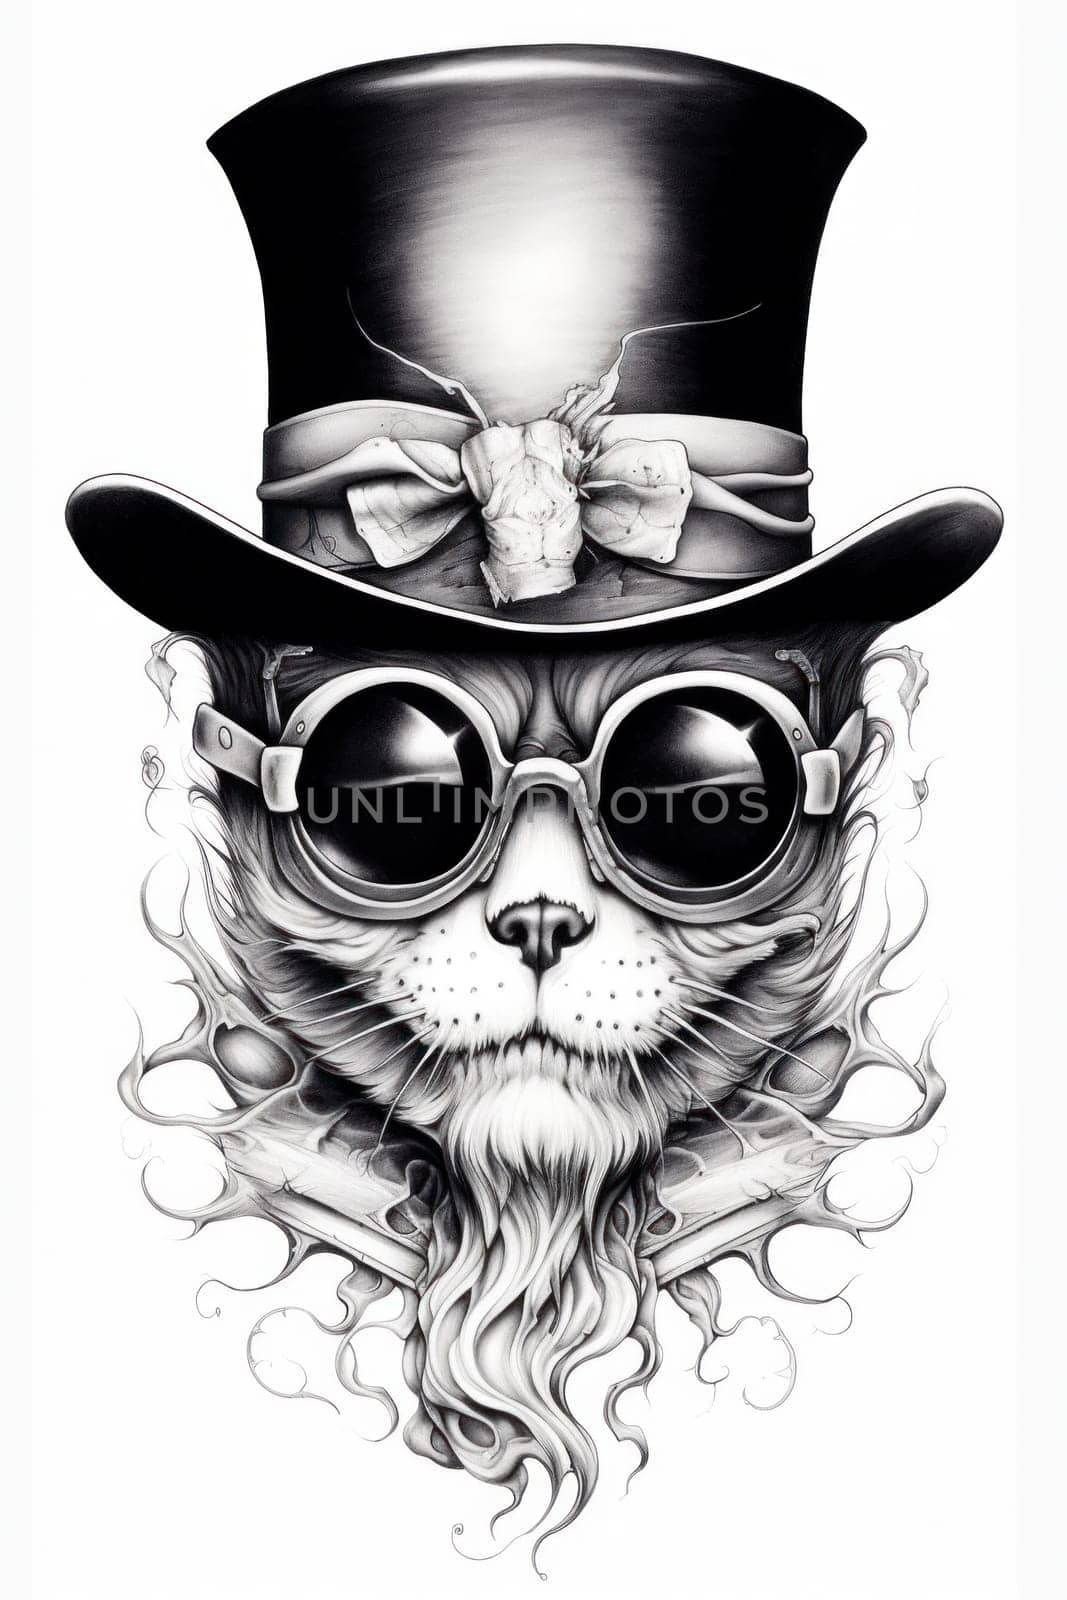 A drawing of a cat wearing a top hat and glasses, AI by starush